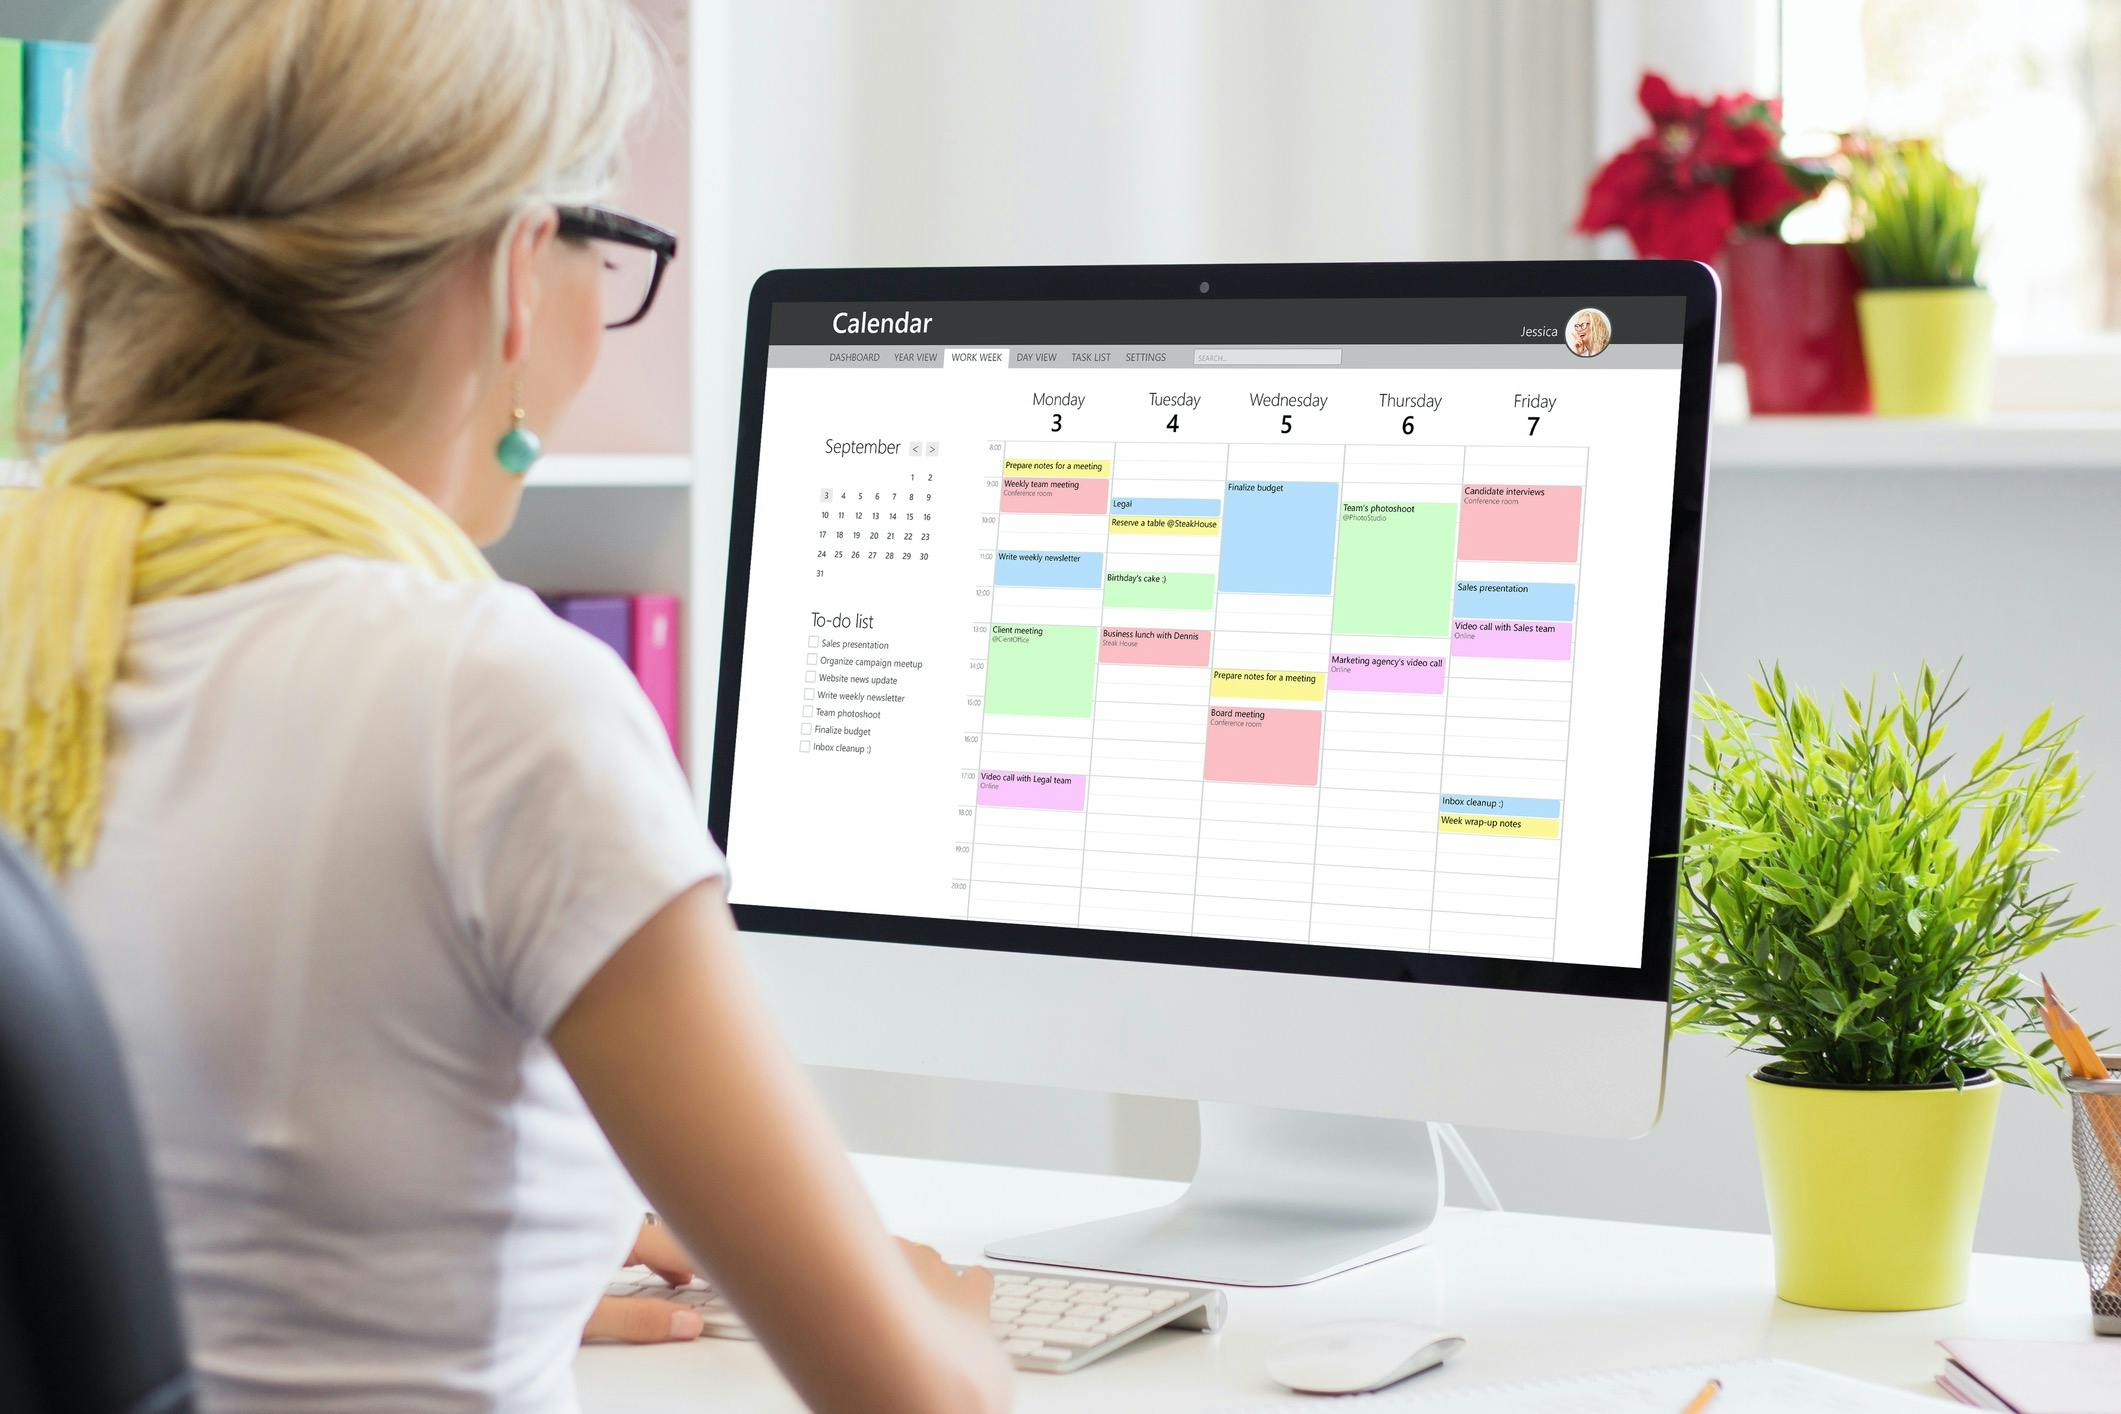 calendar scheduling business appointments